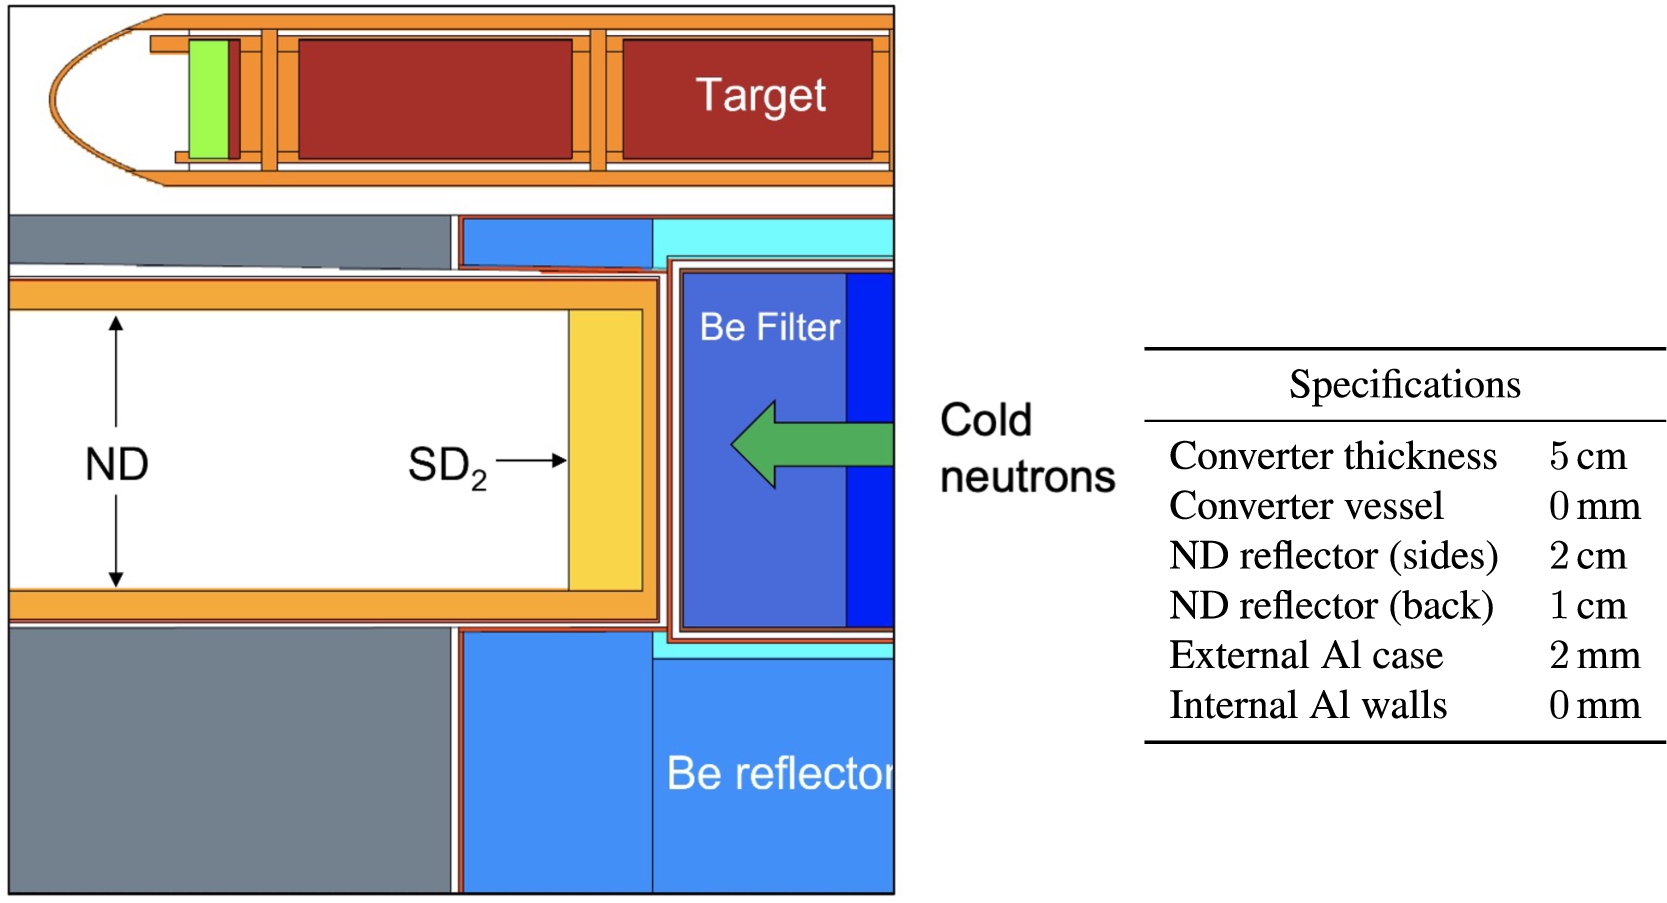 Table 14. (Left) MCNP model of the preliminary test run to check the separate and combined effect of ND and the SD2 block. (Right) parameter table for this model.